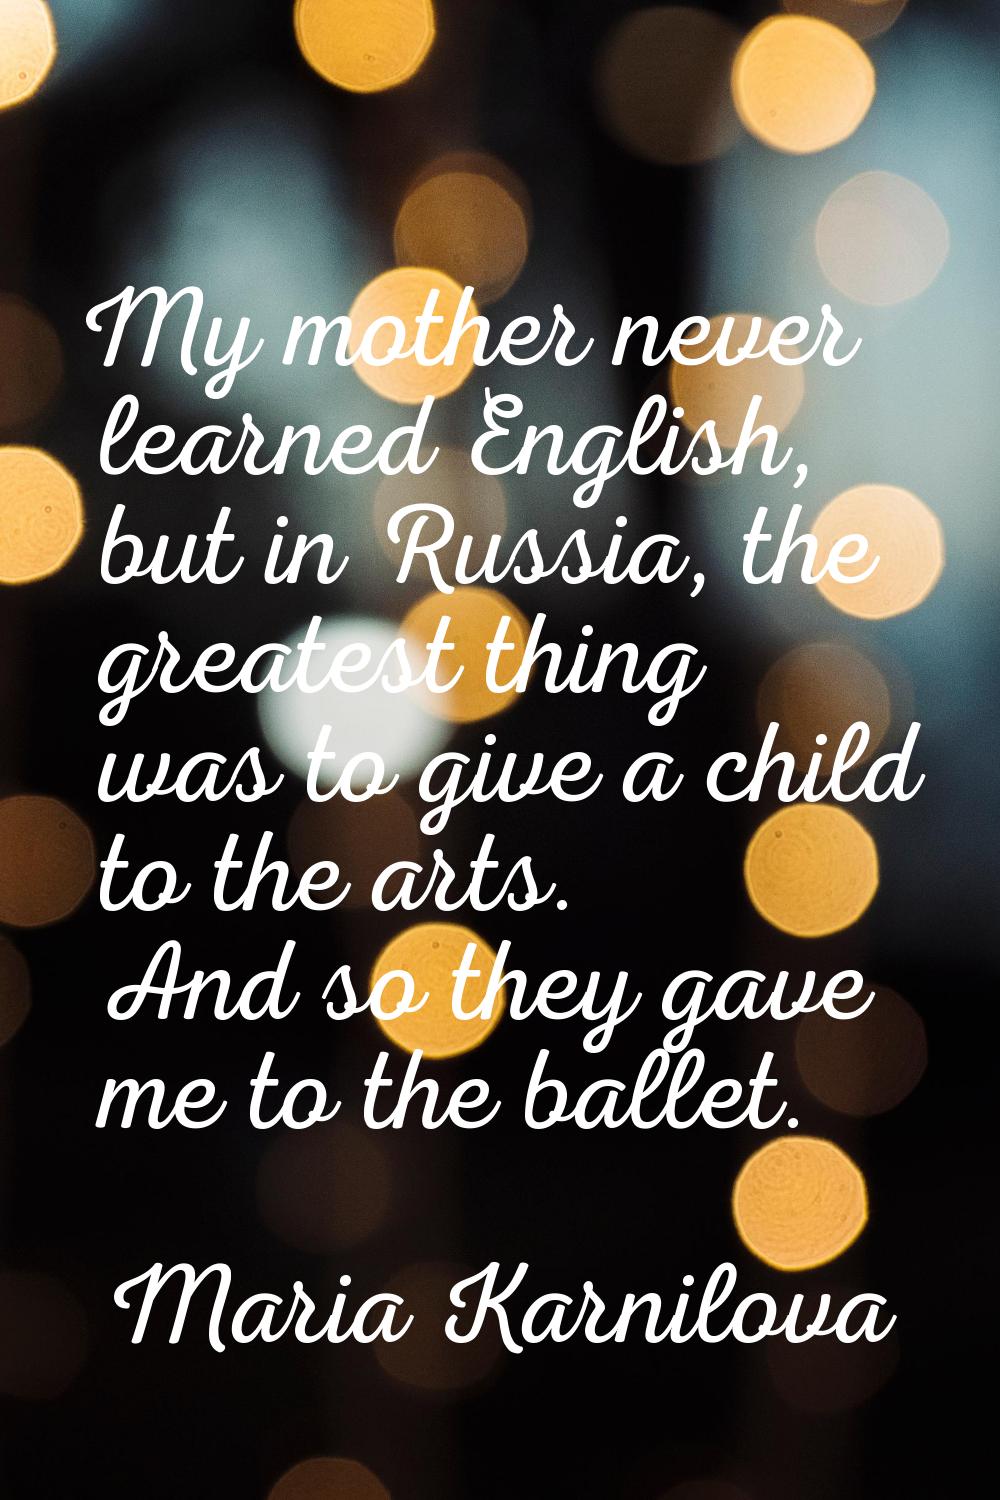 My mother never learned English, but in Russia, the greatest thing was to give a child to the arts.